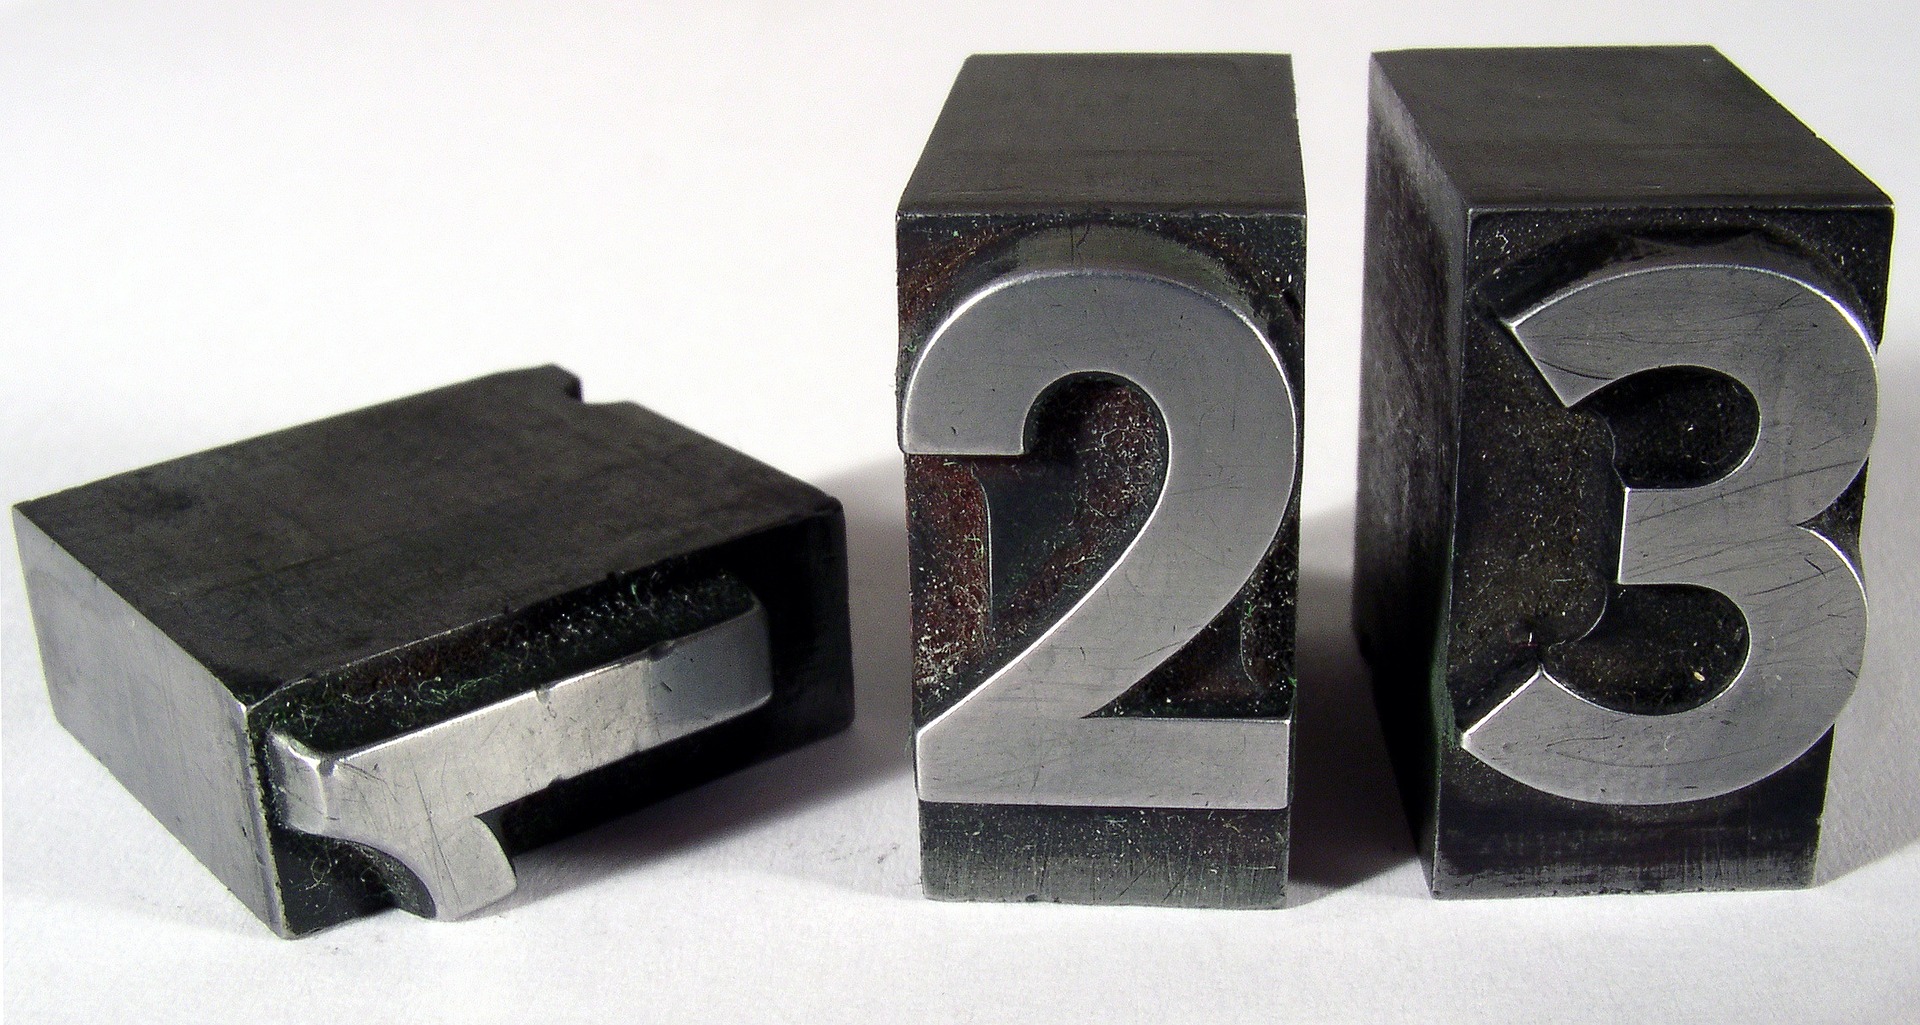 Three blocks with the numbers 1, 2, 3